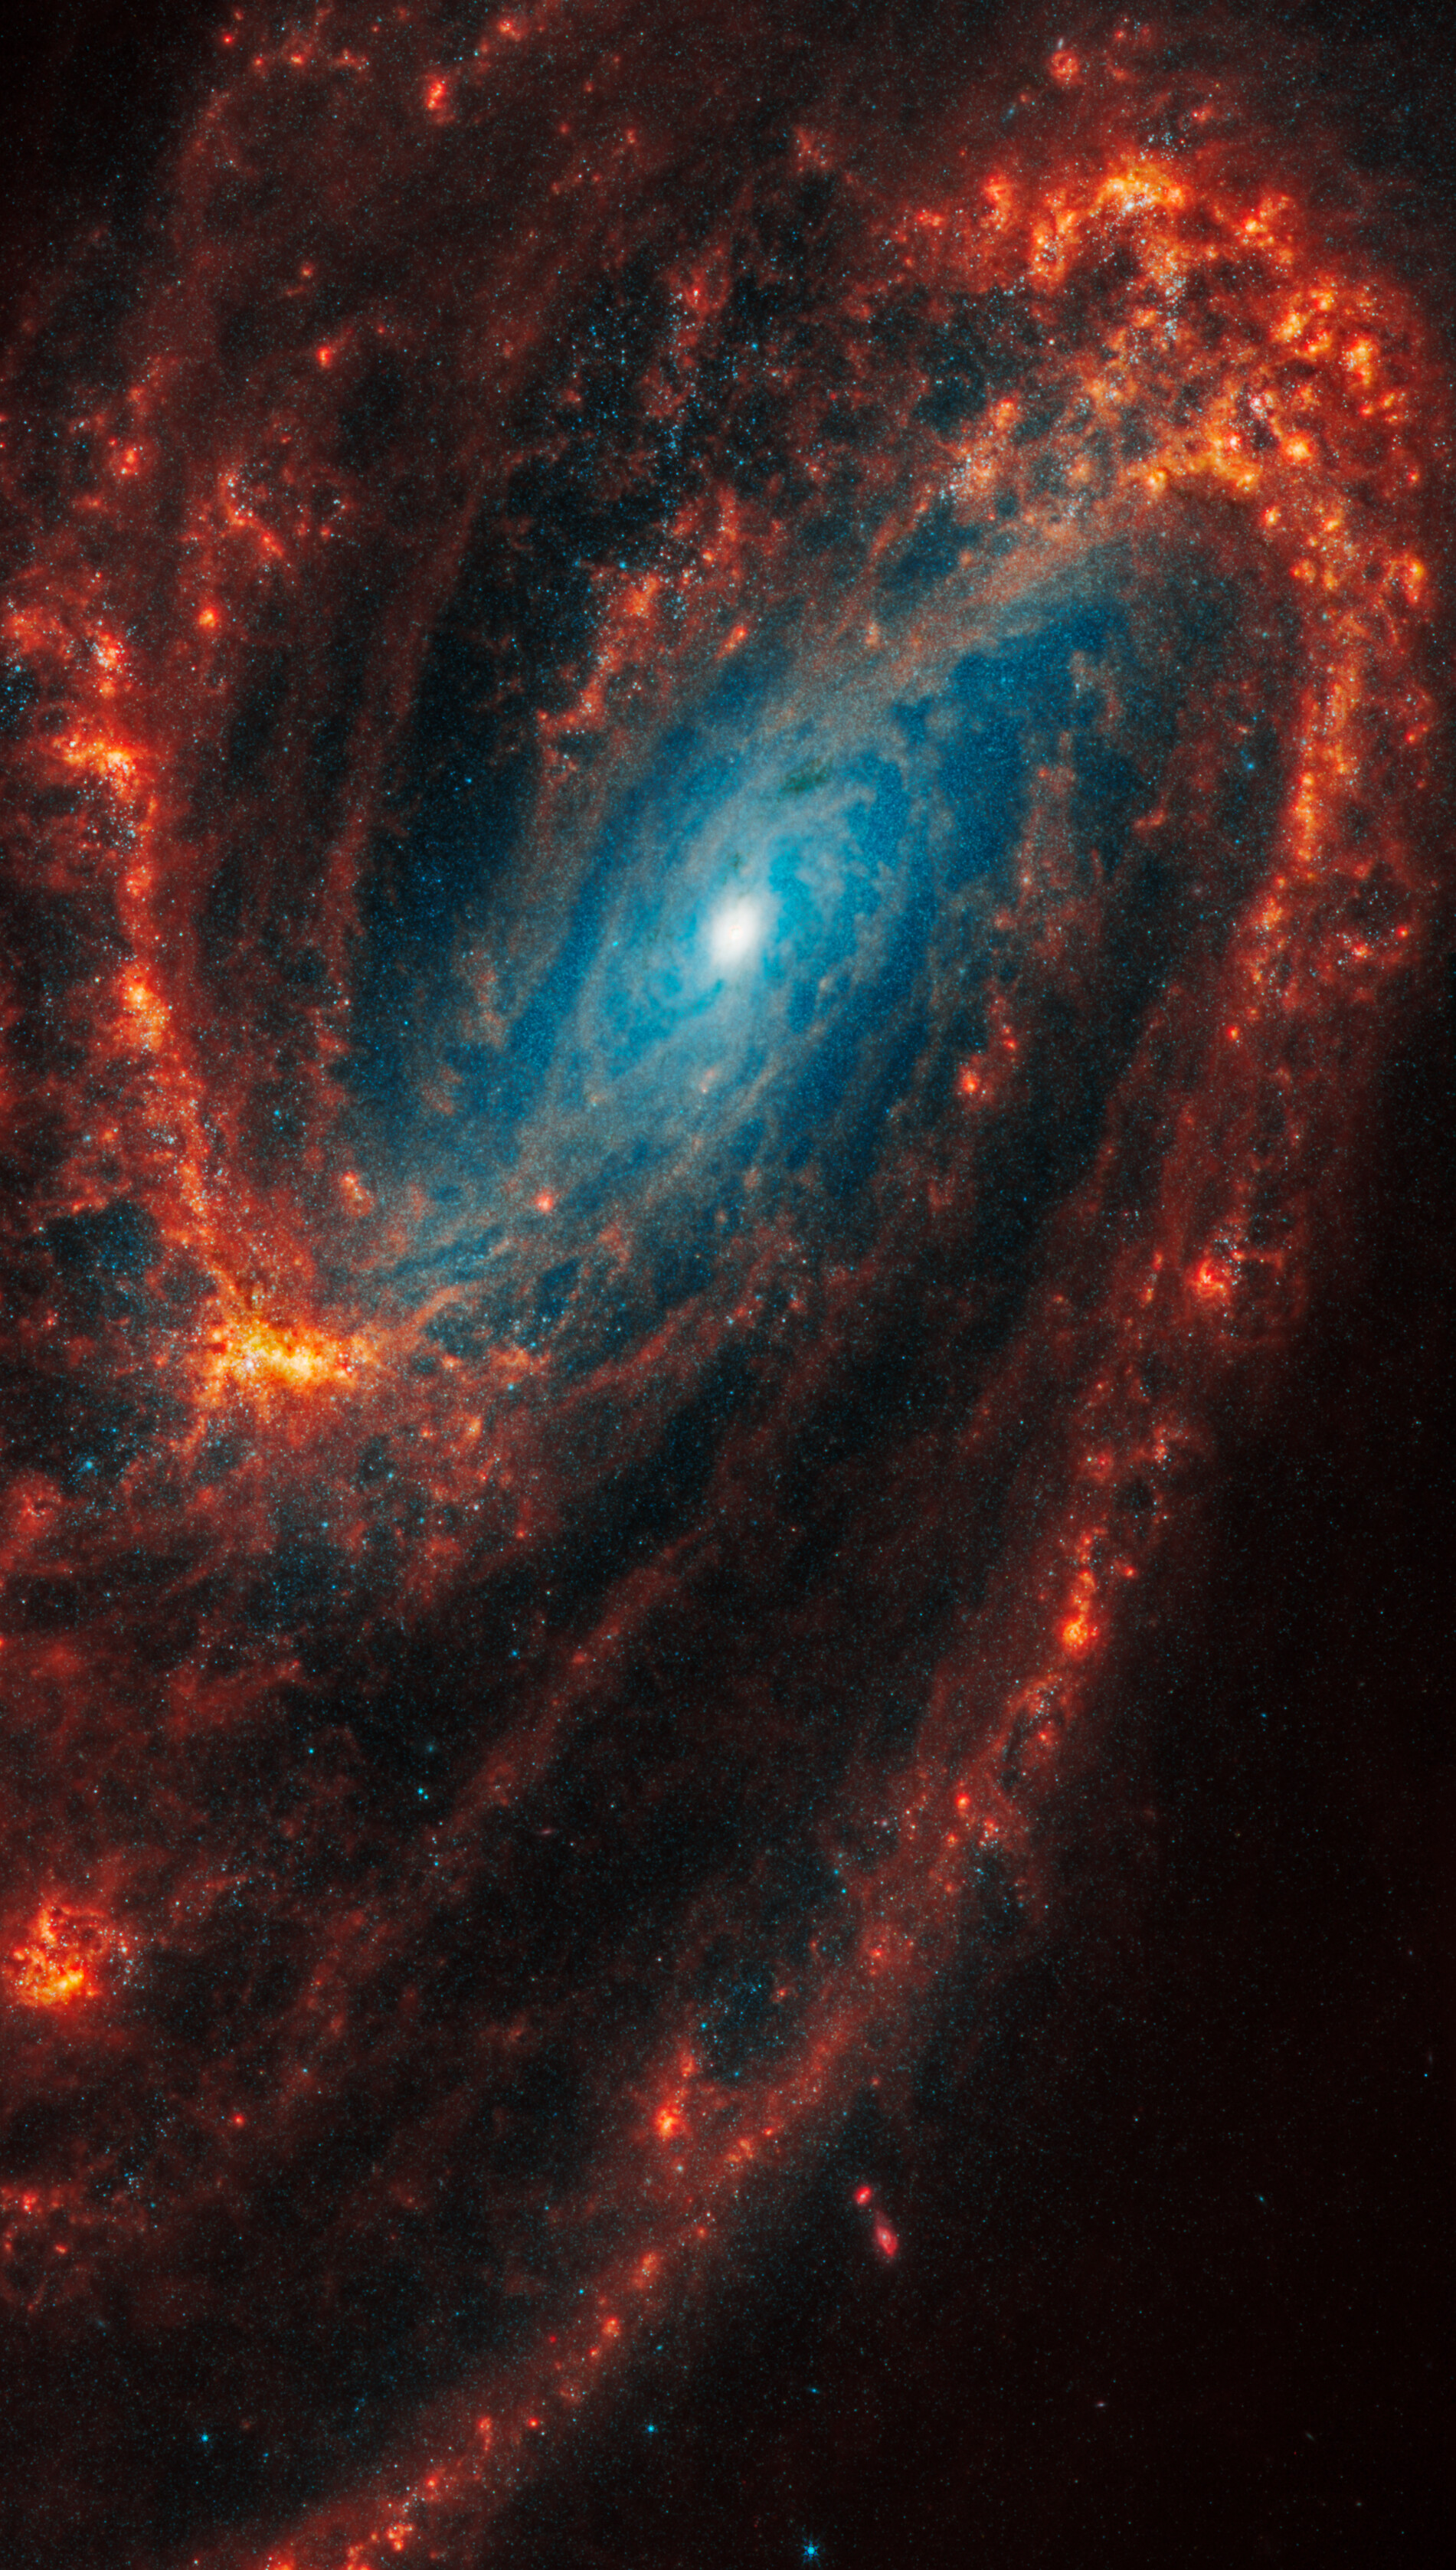 Webb’s image of NGC 3627 shows a face-on barred spiral galaxy anchored by its central region, which has a bright blue central dot. It is surrounded by a bar structure filled with a lighter blue haze of stars, which forms a large, angled oval toward the top. Two large distinct spiral arms appear as arcs that start at the central bar. One starts at left and stretches to the top and another starts at right and extends to the bottom